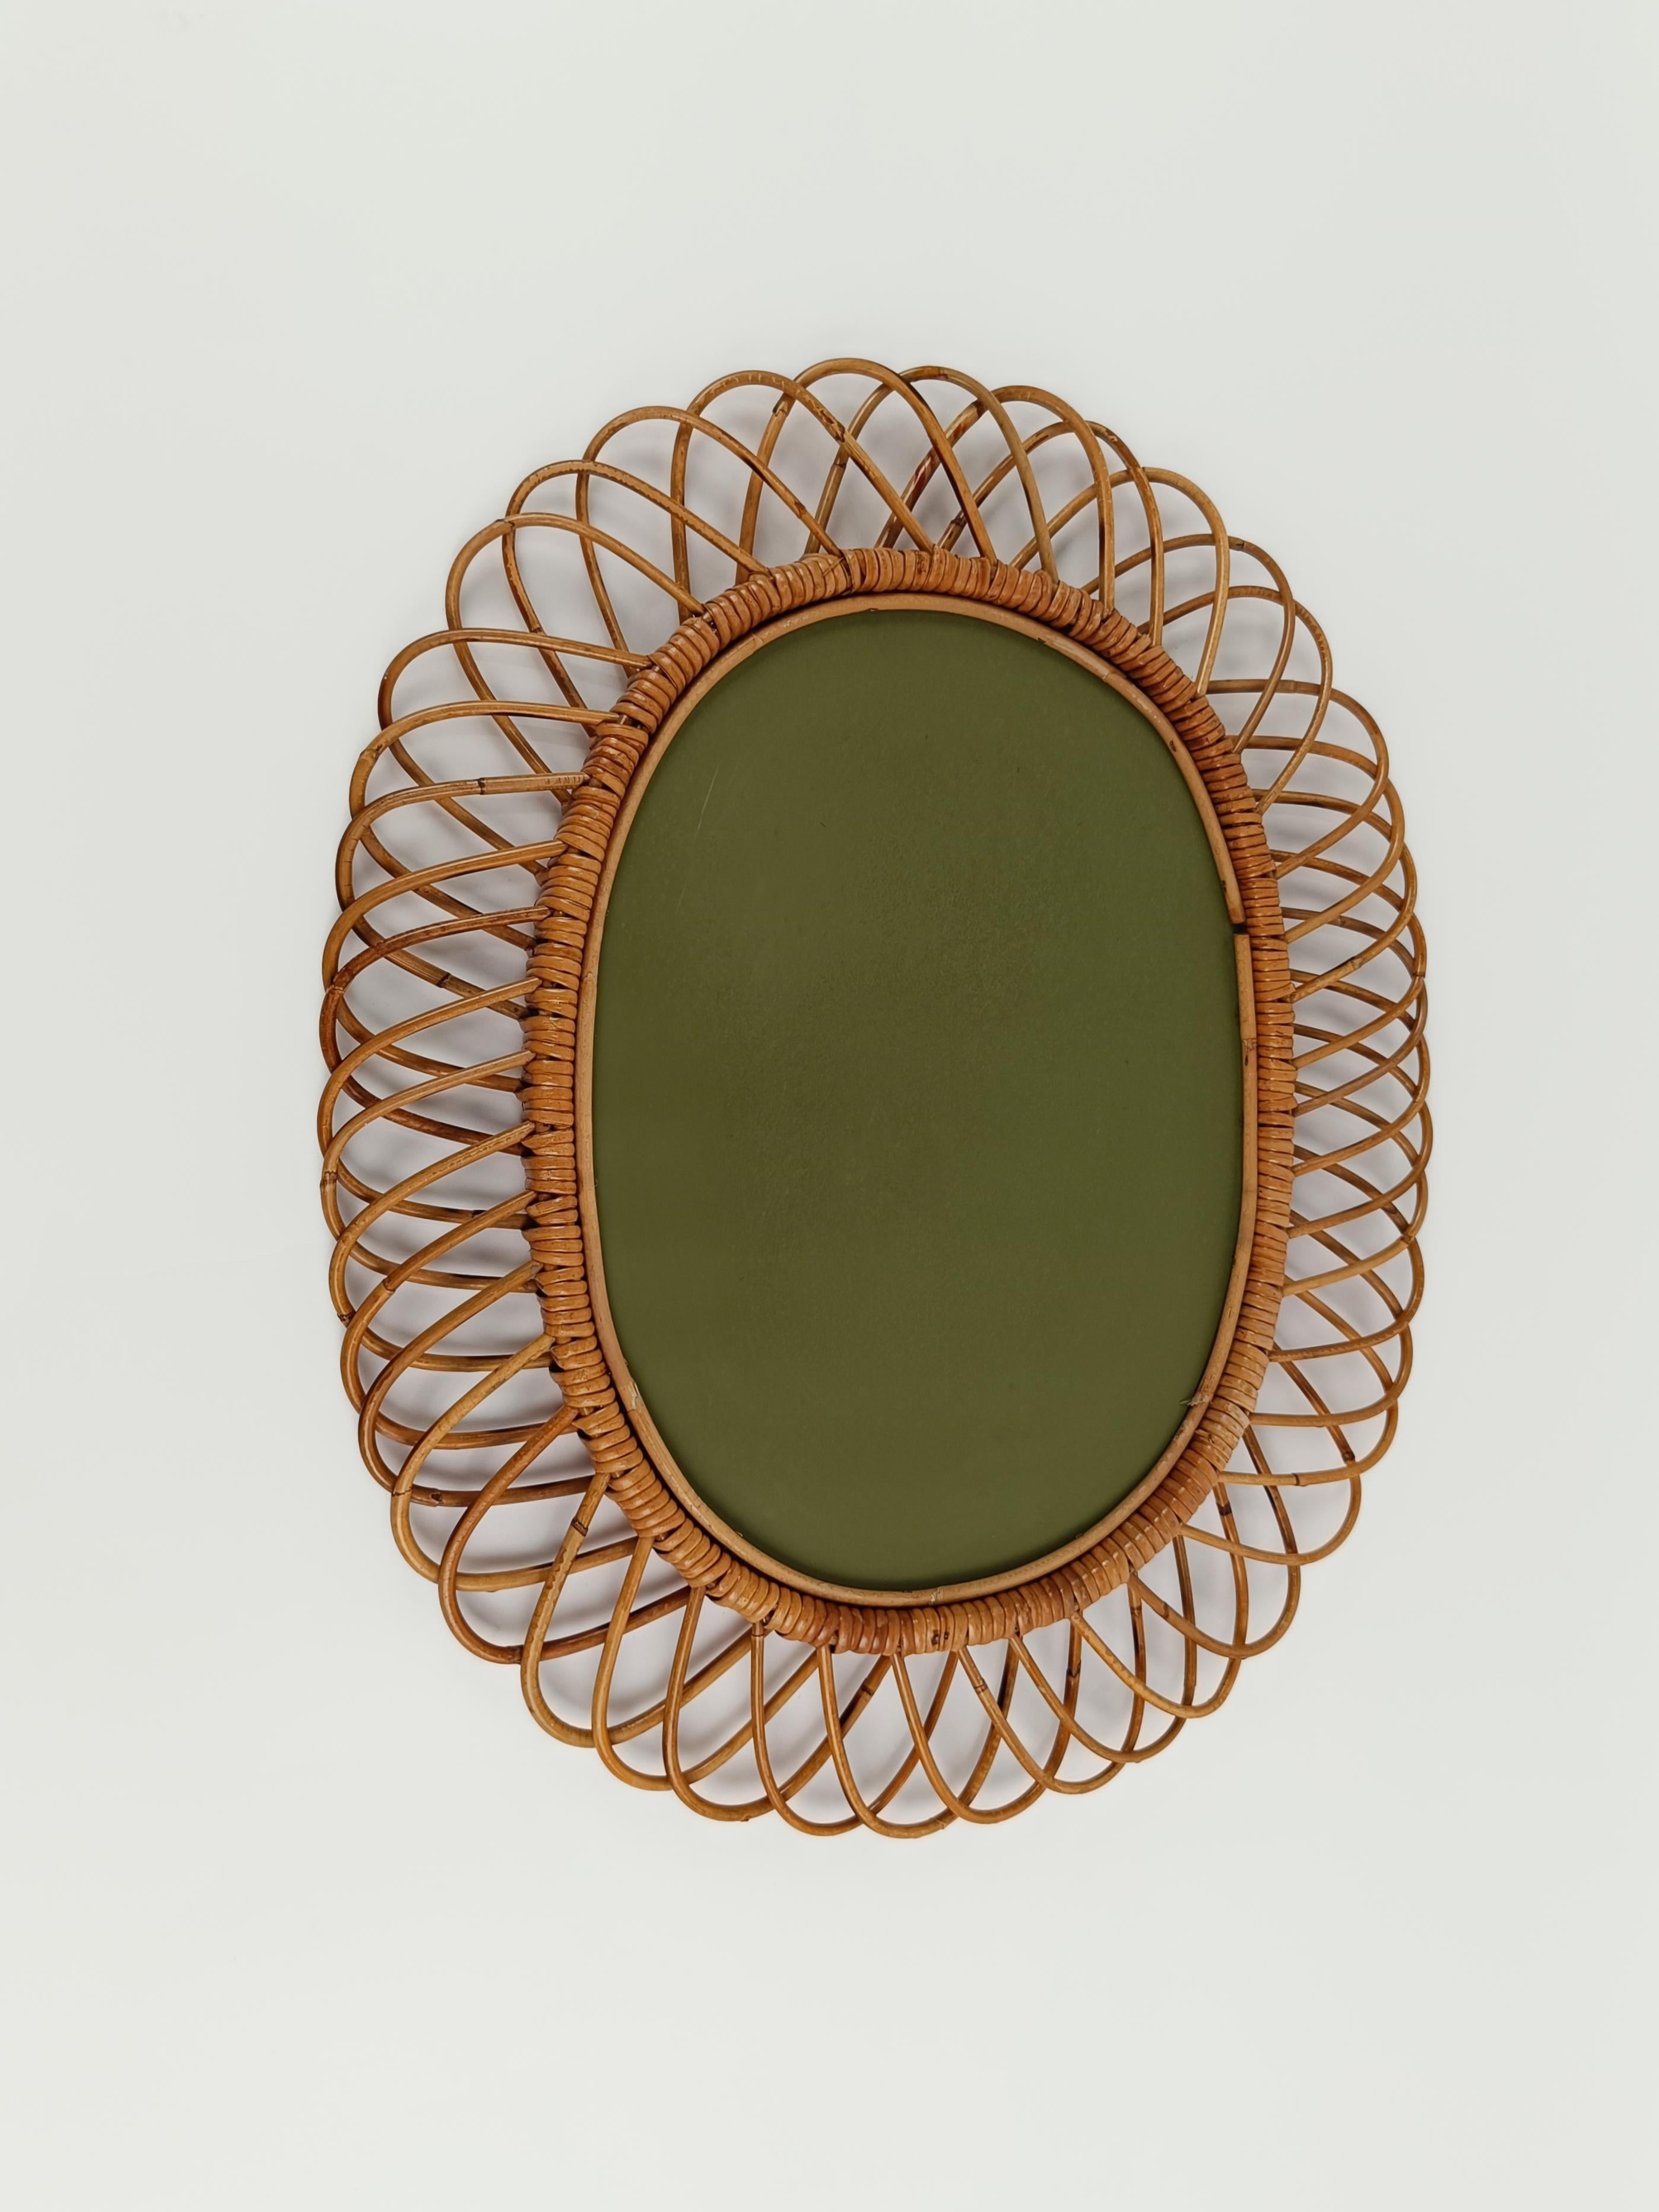  Italian Oval Mirror made in Bamboo, Cane and Rattan in the Riviera Style 1960s  For Sale 4